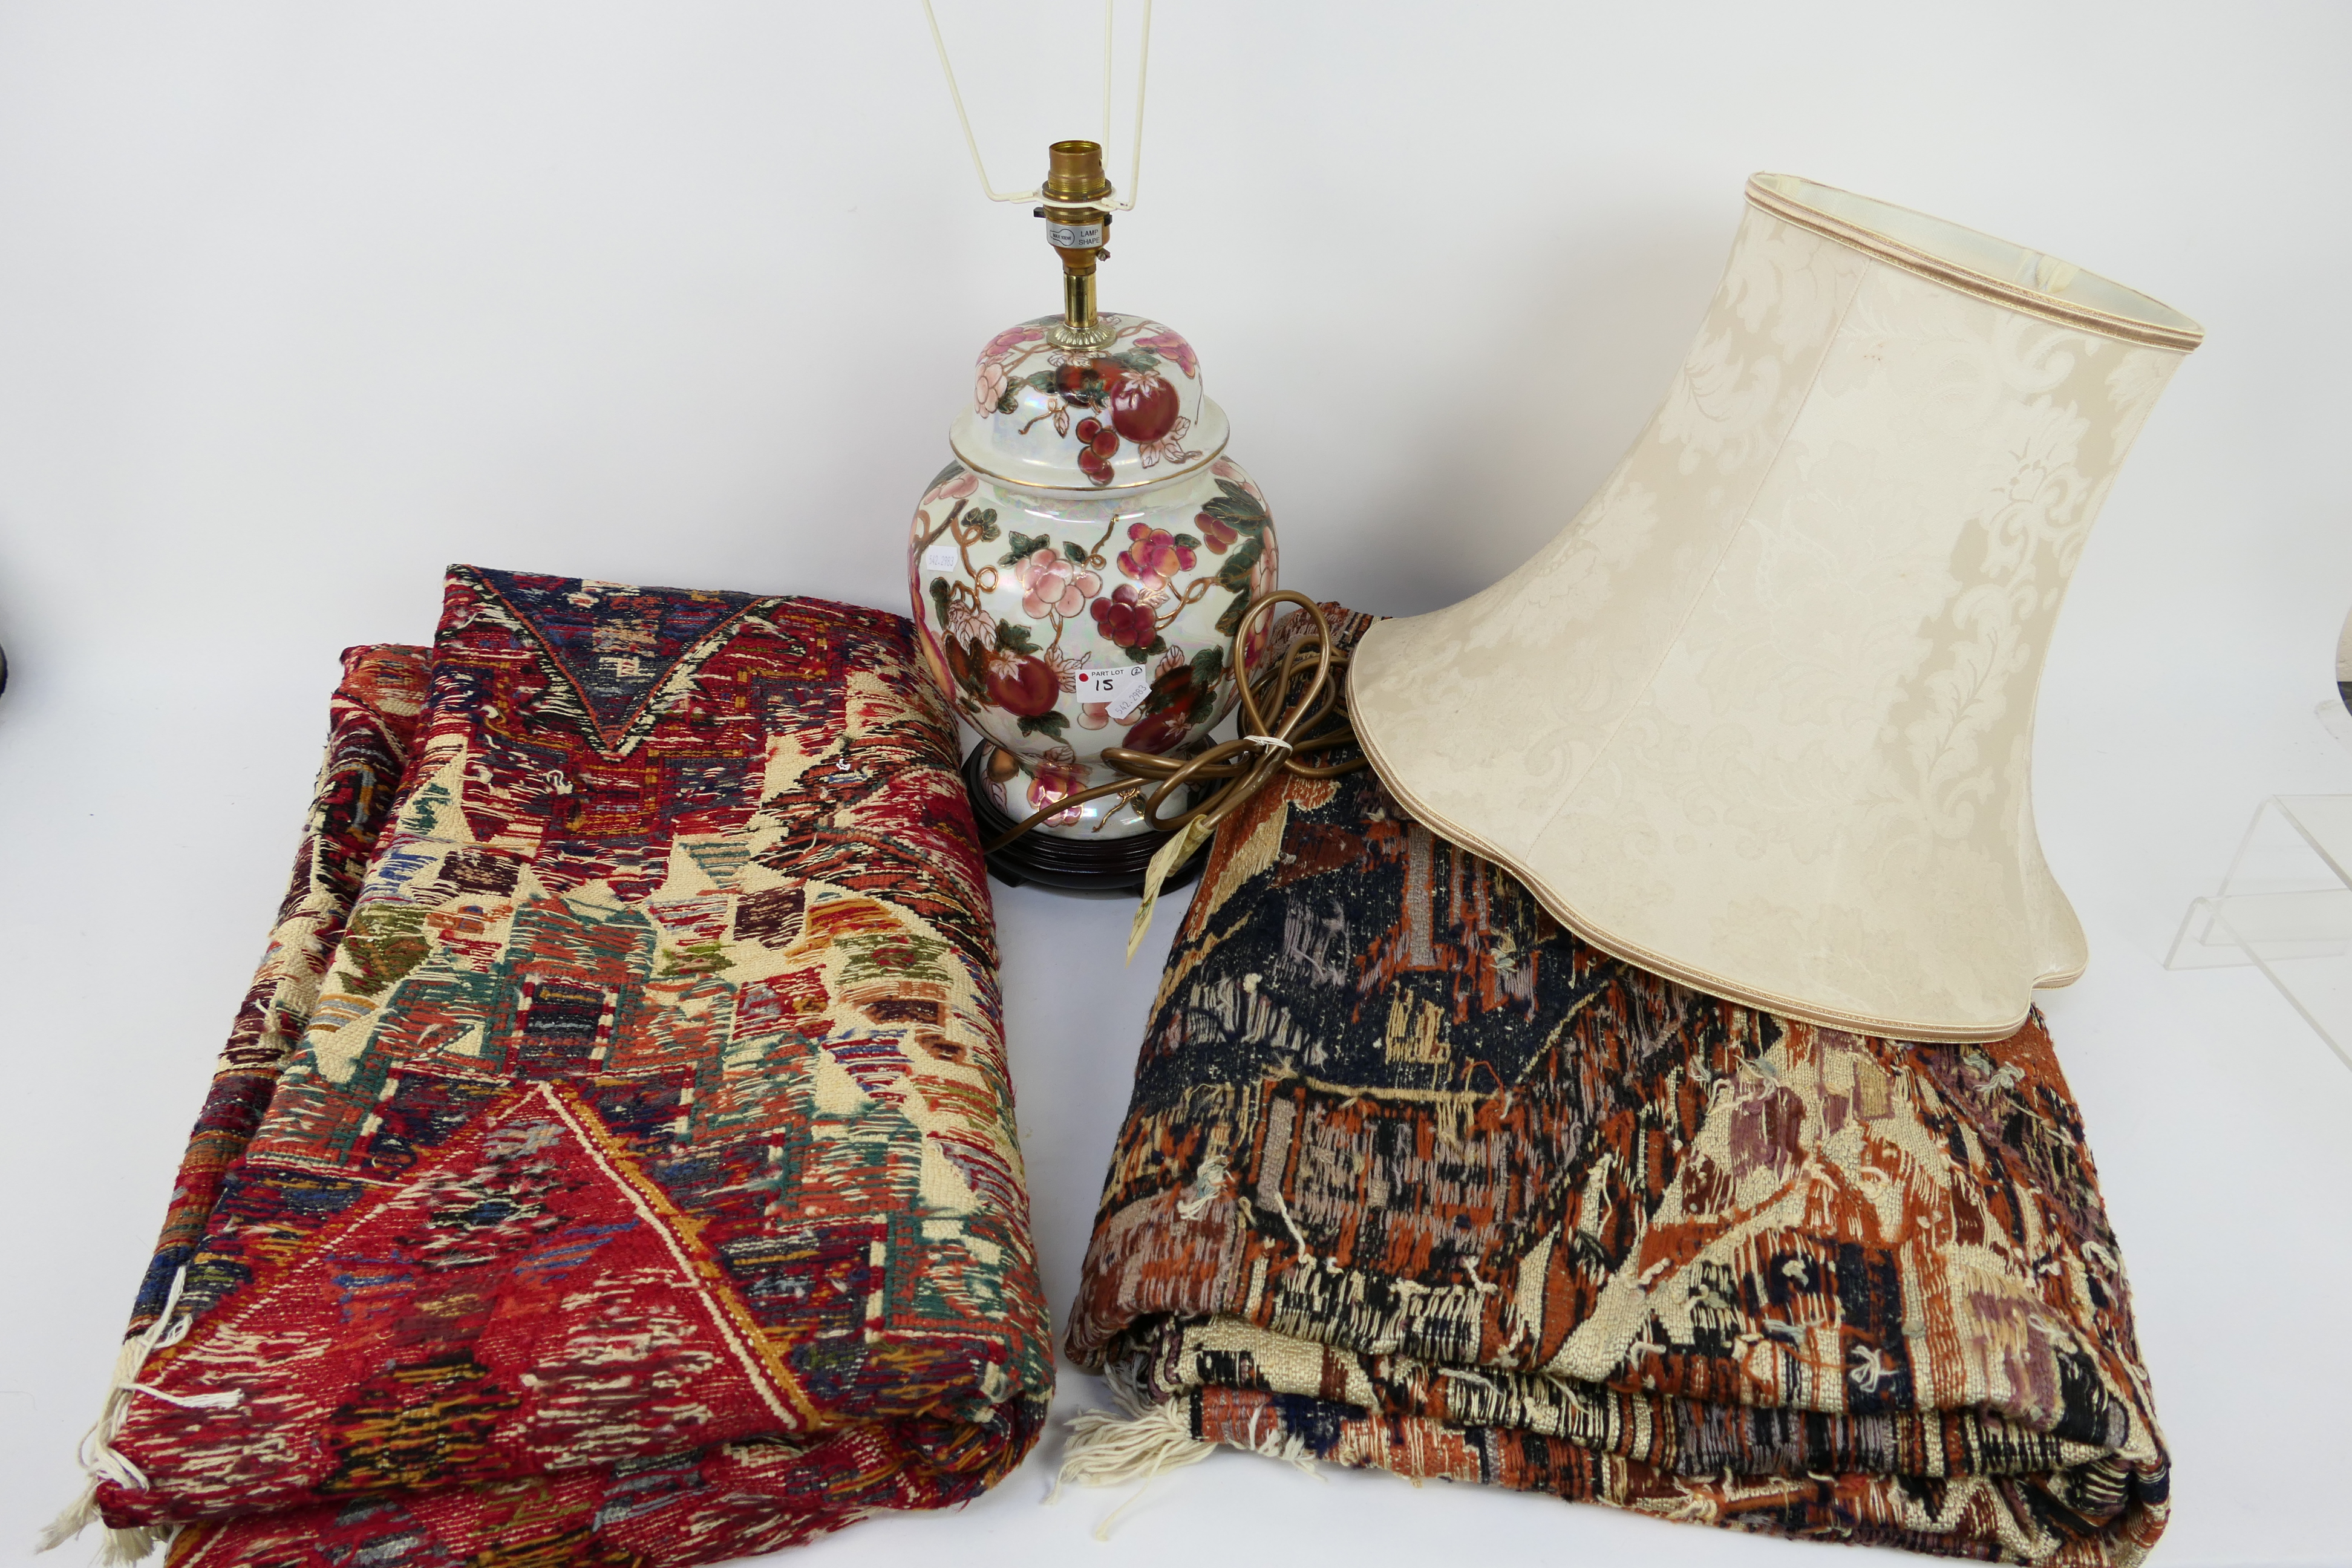 A ginger jar table lamp, two Turkish carpets, approximately 210 cm x 130 cm.